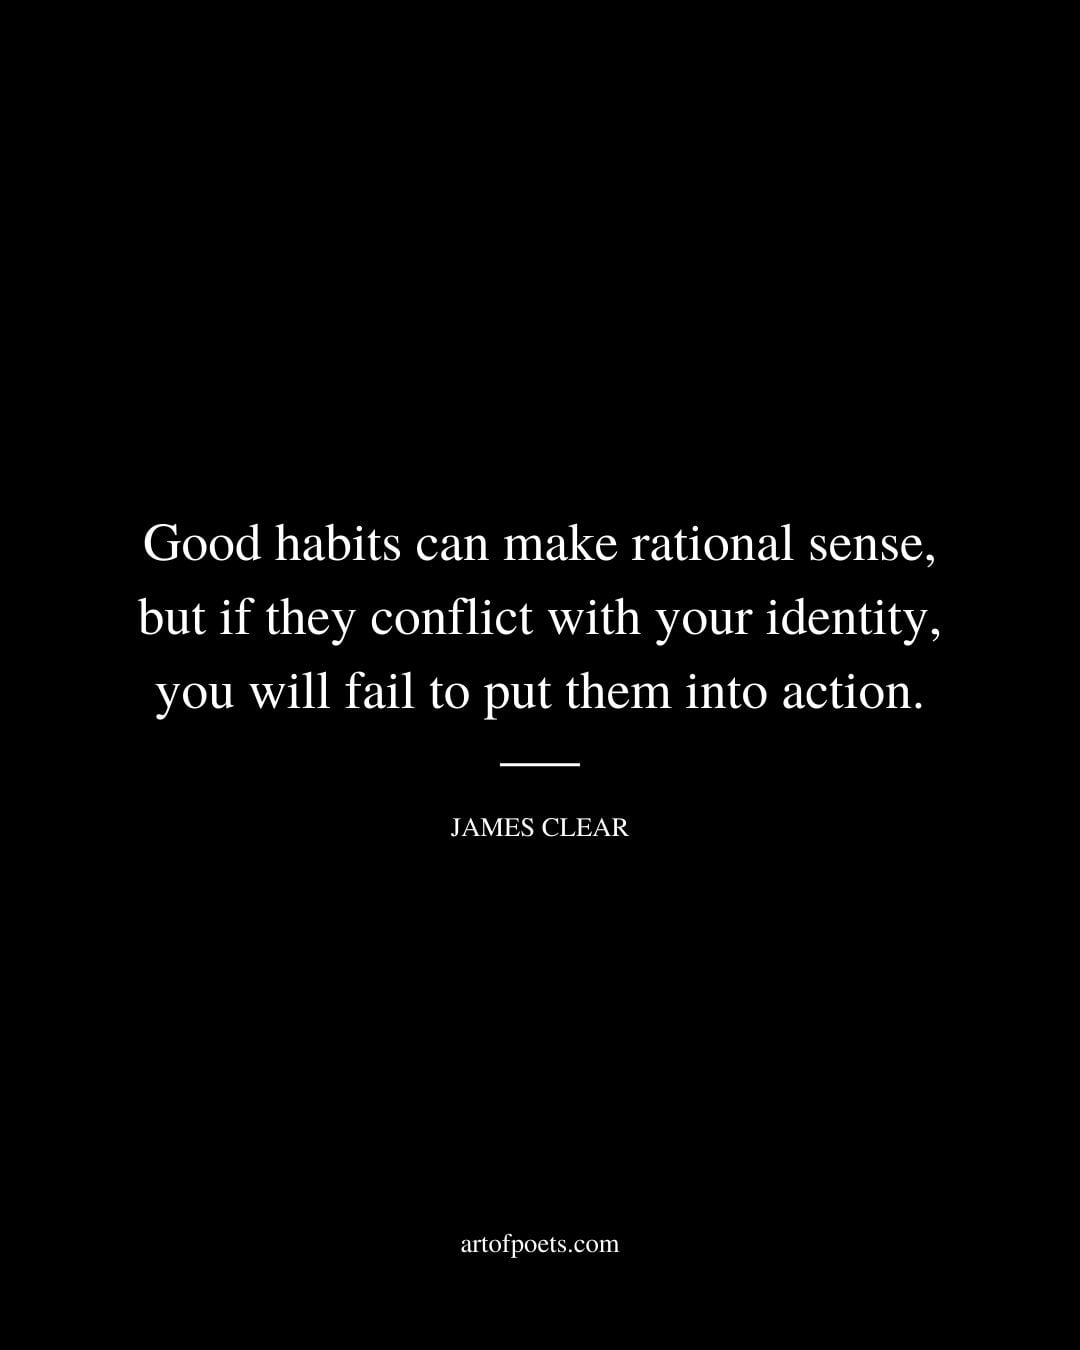 Good habits can make rational sense but if they conflict with your identity you will fail to put them into action